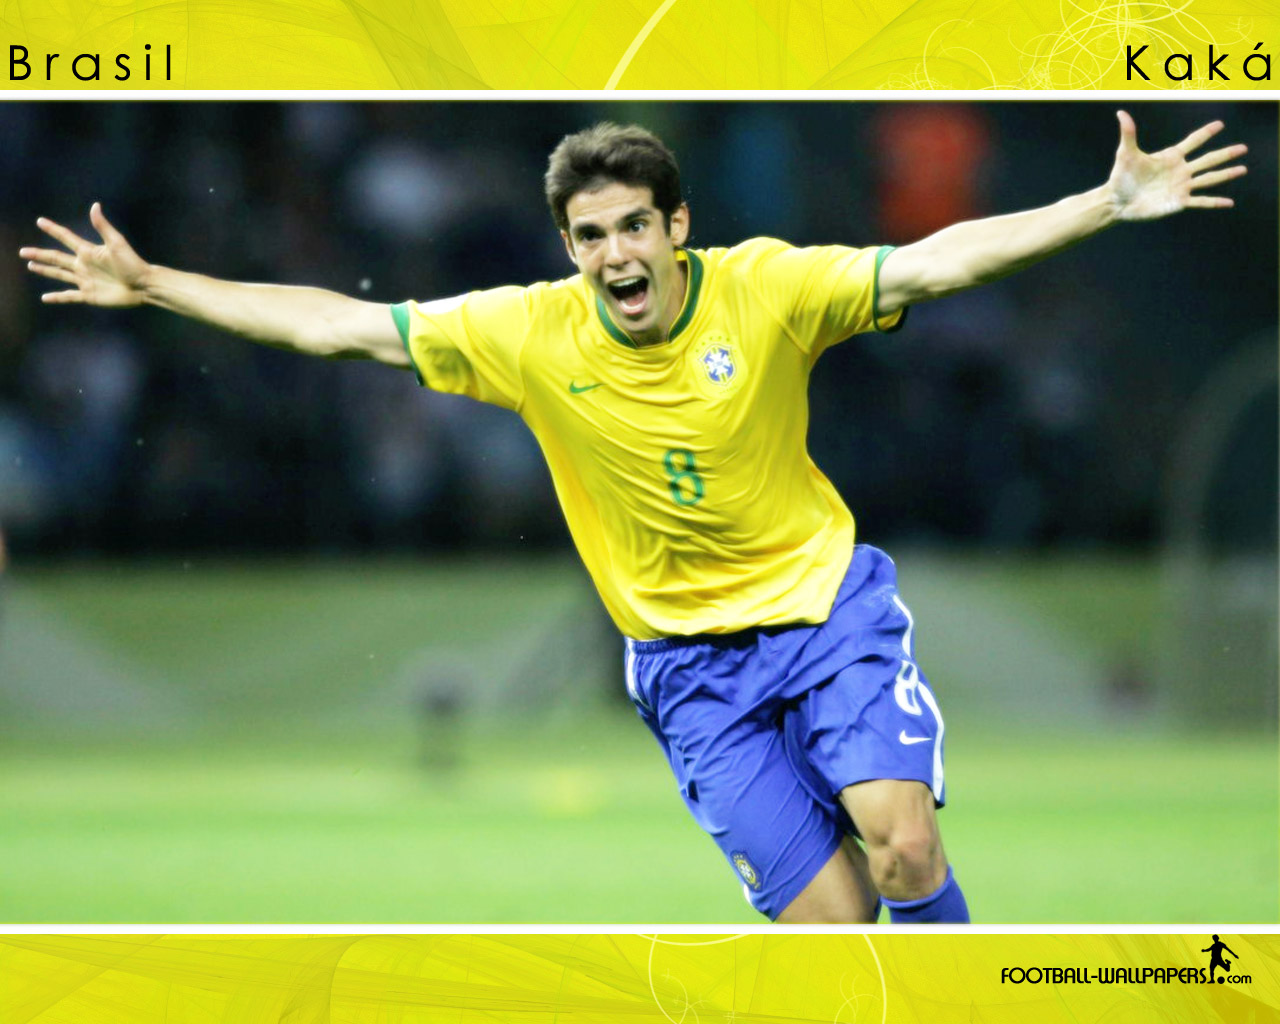 Free download Kaka Wallpaper 3 Football Wallpaper and Videos [1280x1024] for your Desktop, Mobile & Tablet. Explore Kaka Footballer Wallpaper. Kaka Footballer Wallpaper, Kaka Wallpaper, Kaka Wallpaper HD